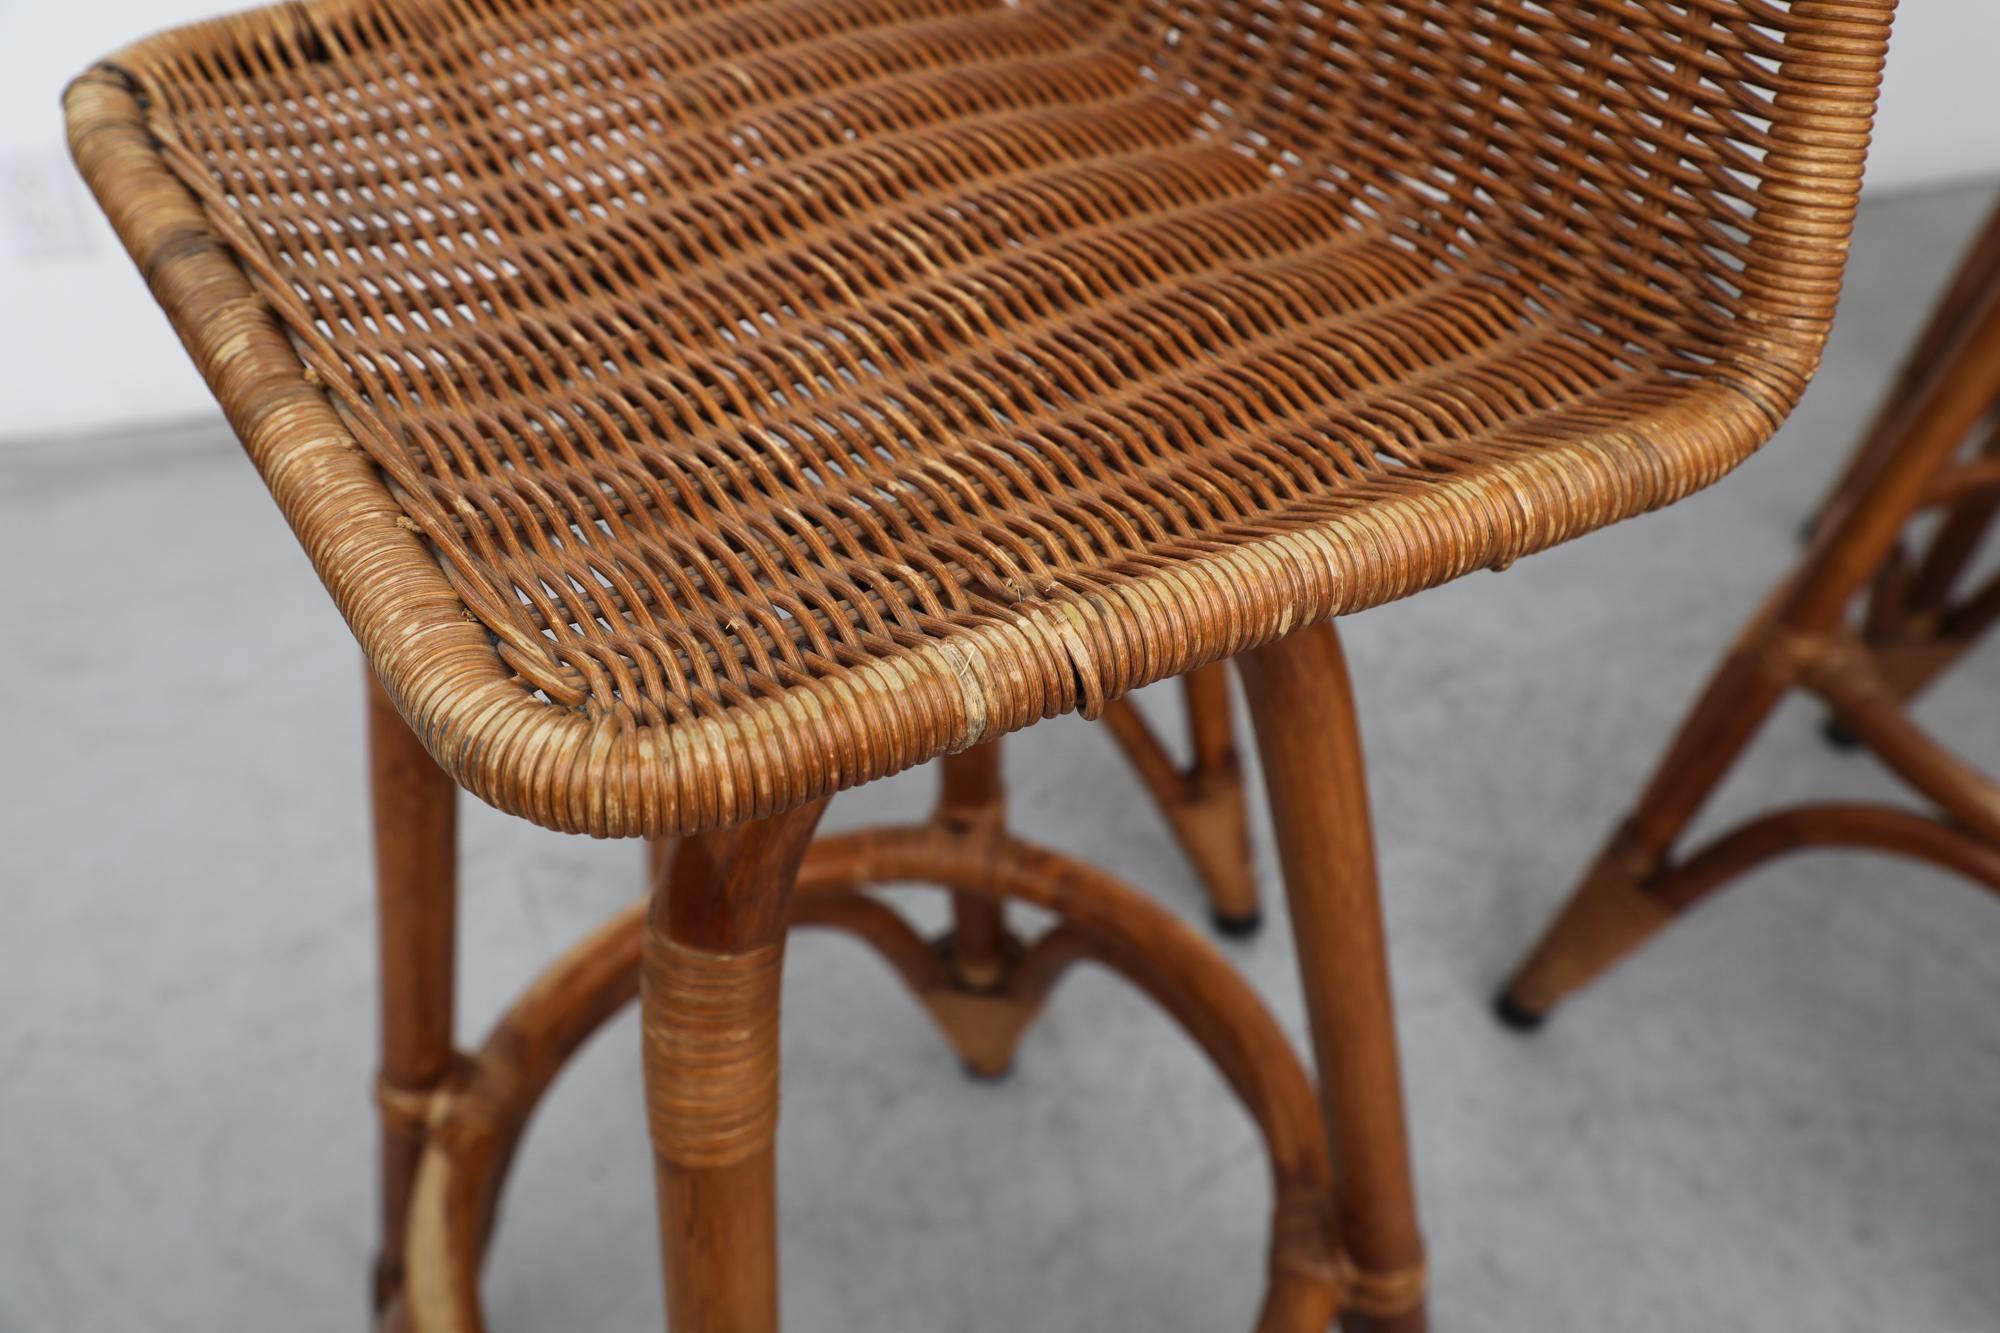 Set of 5 Rohe Noordwolde Rattan and Bamboo Bar Stools 3